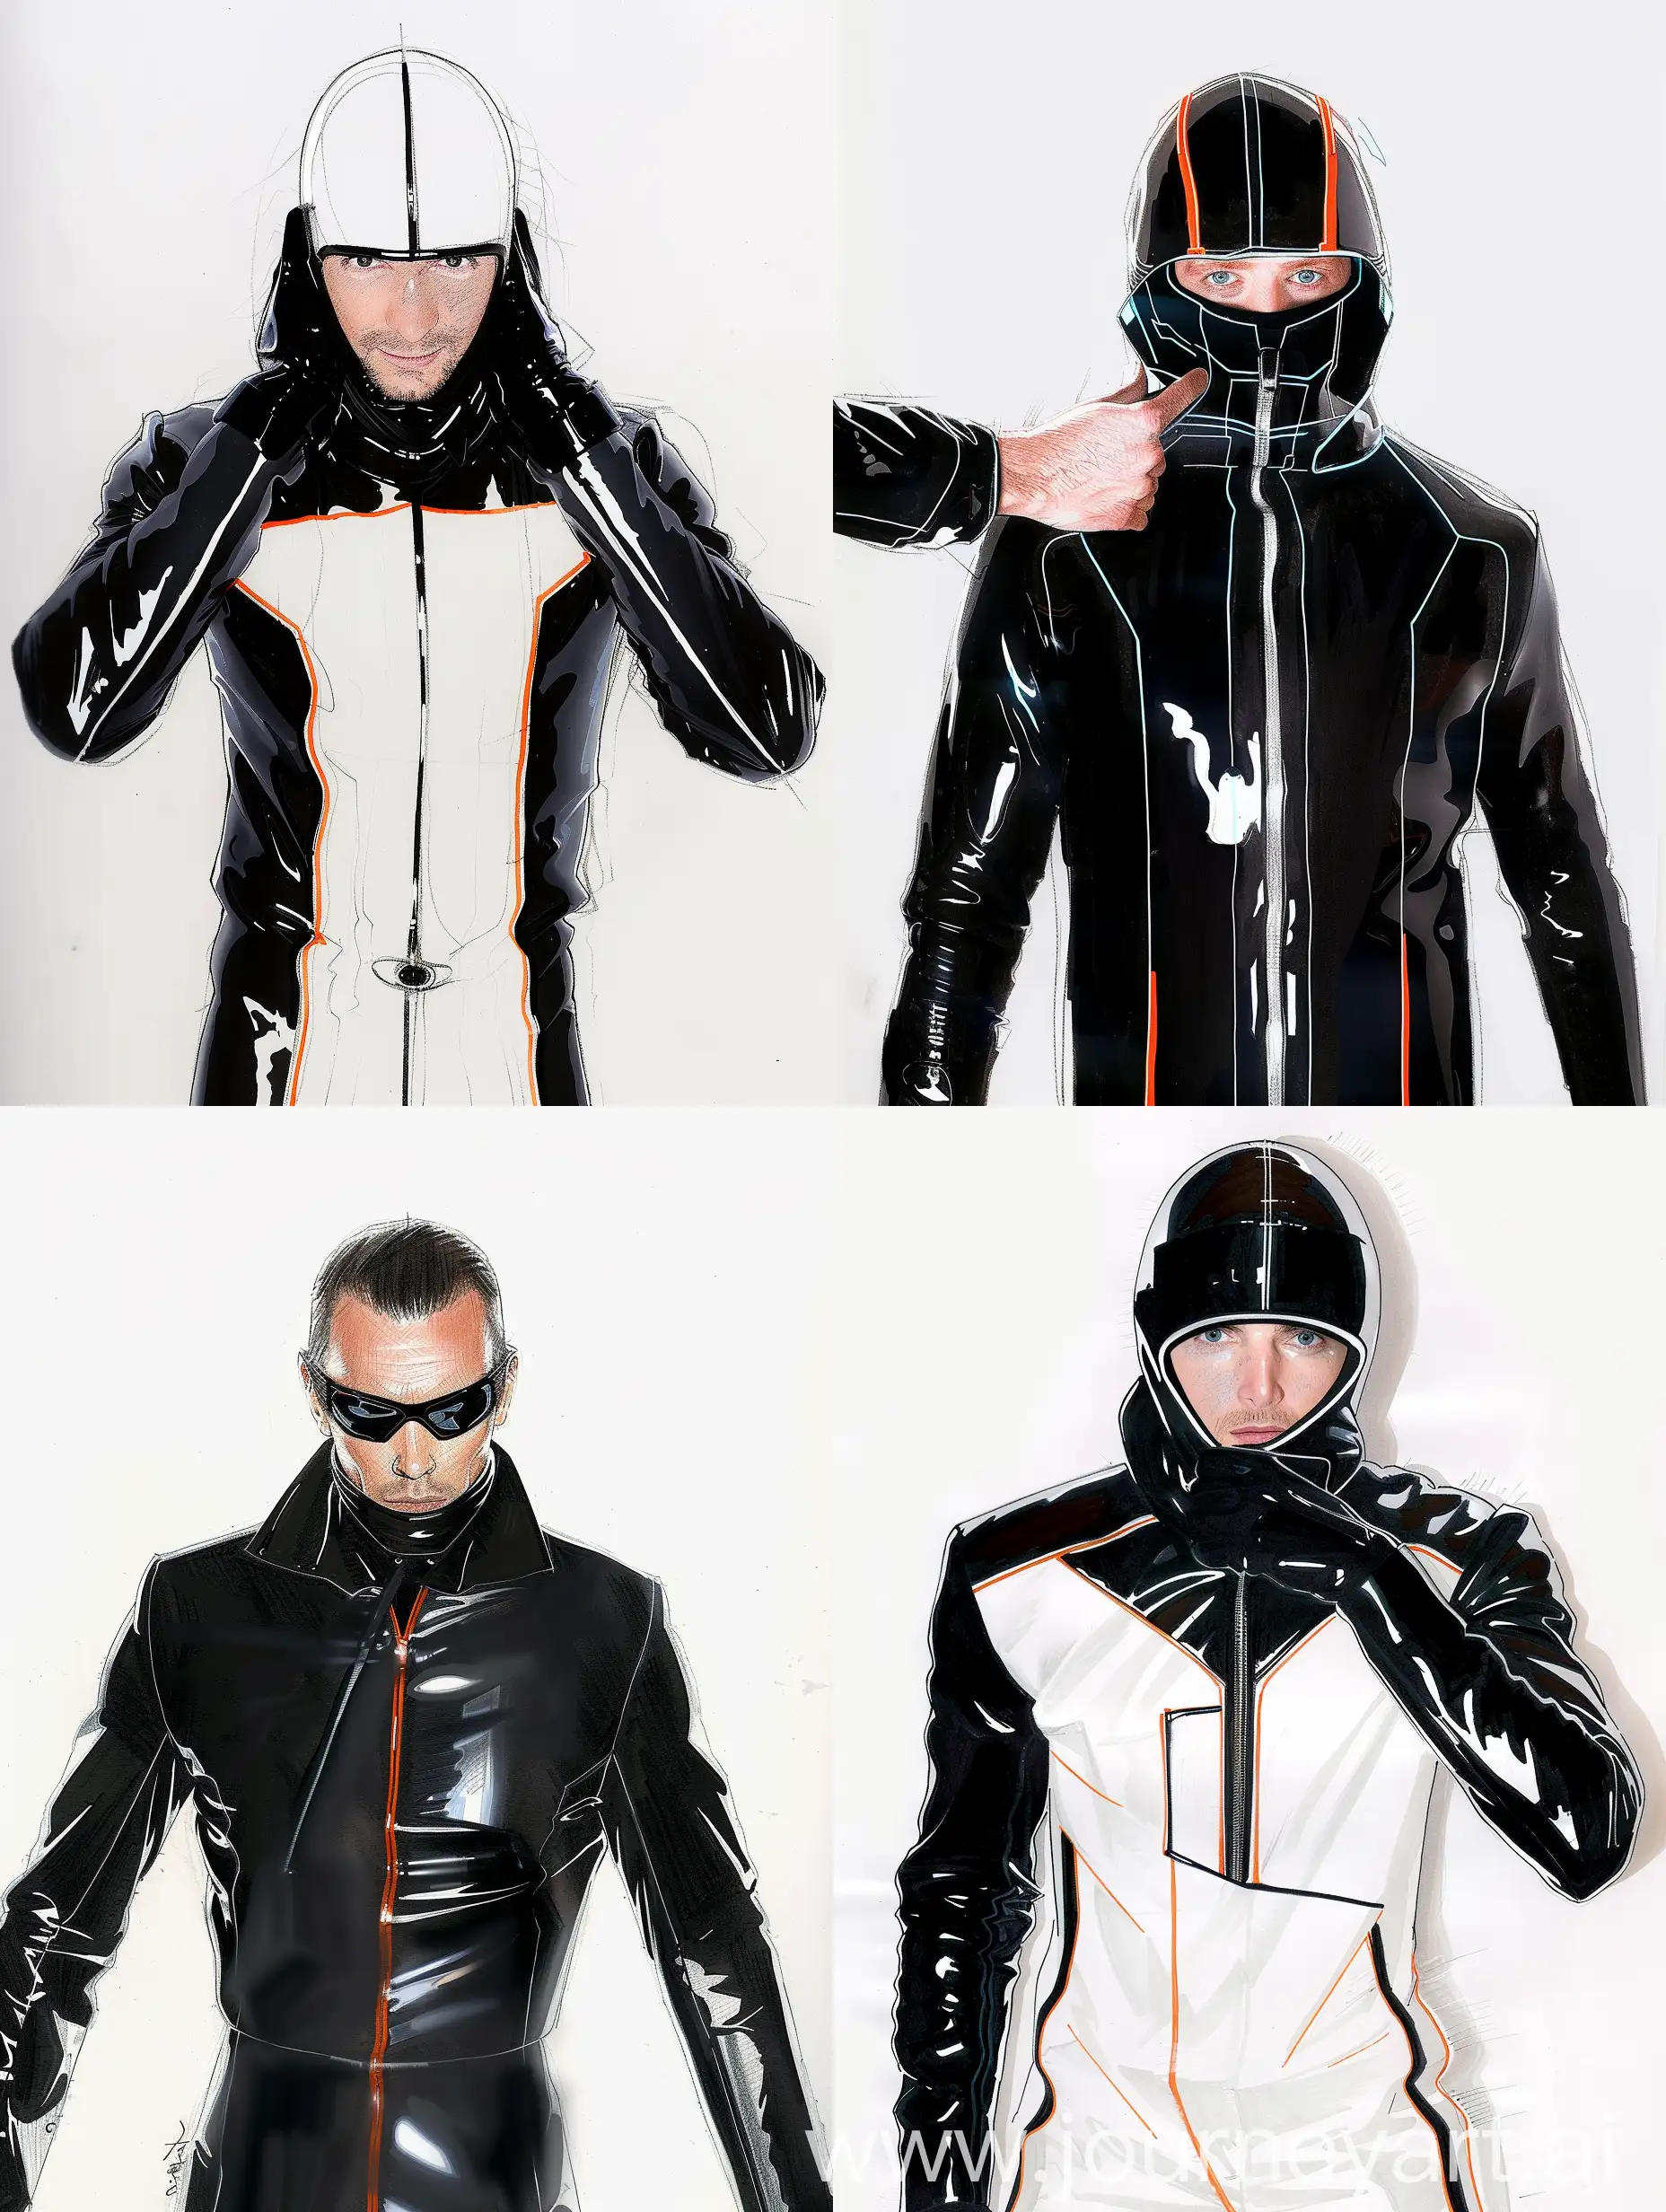 Men Fashion Sketch inspired by the film Tron: Legacy